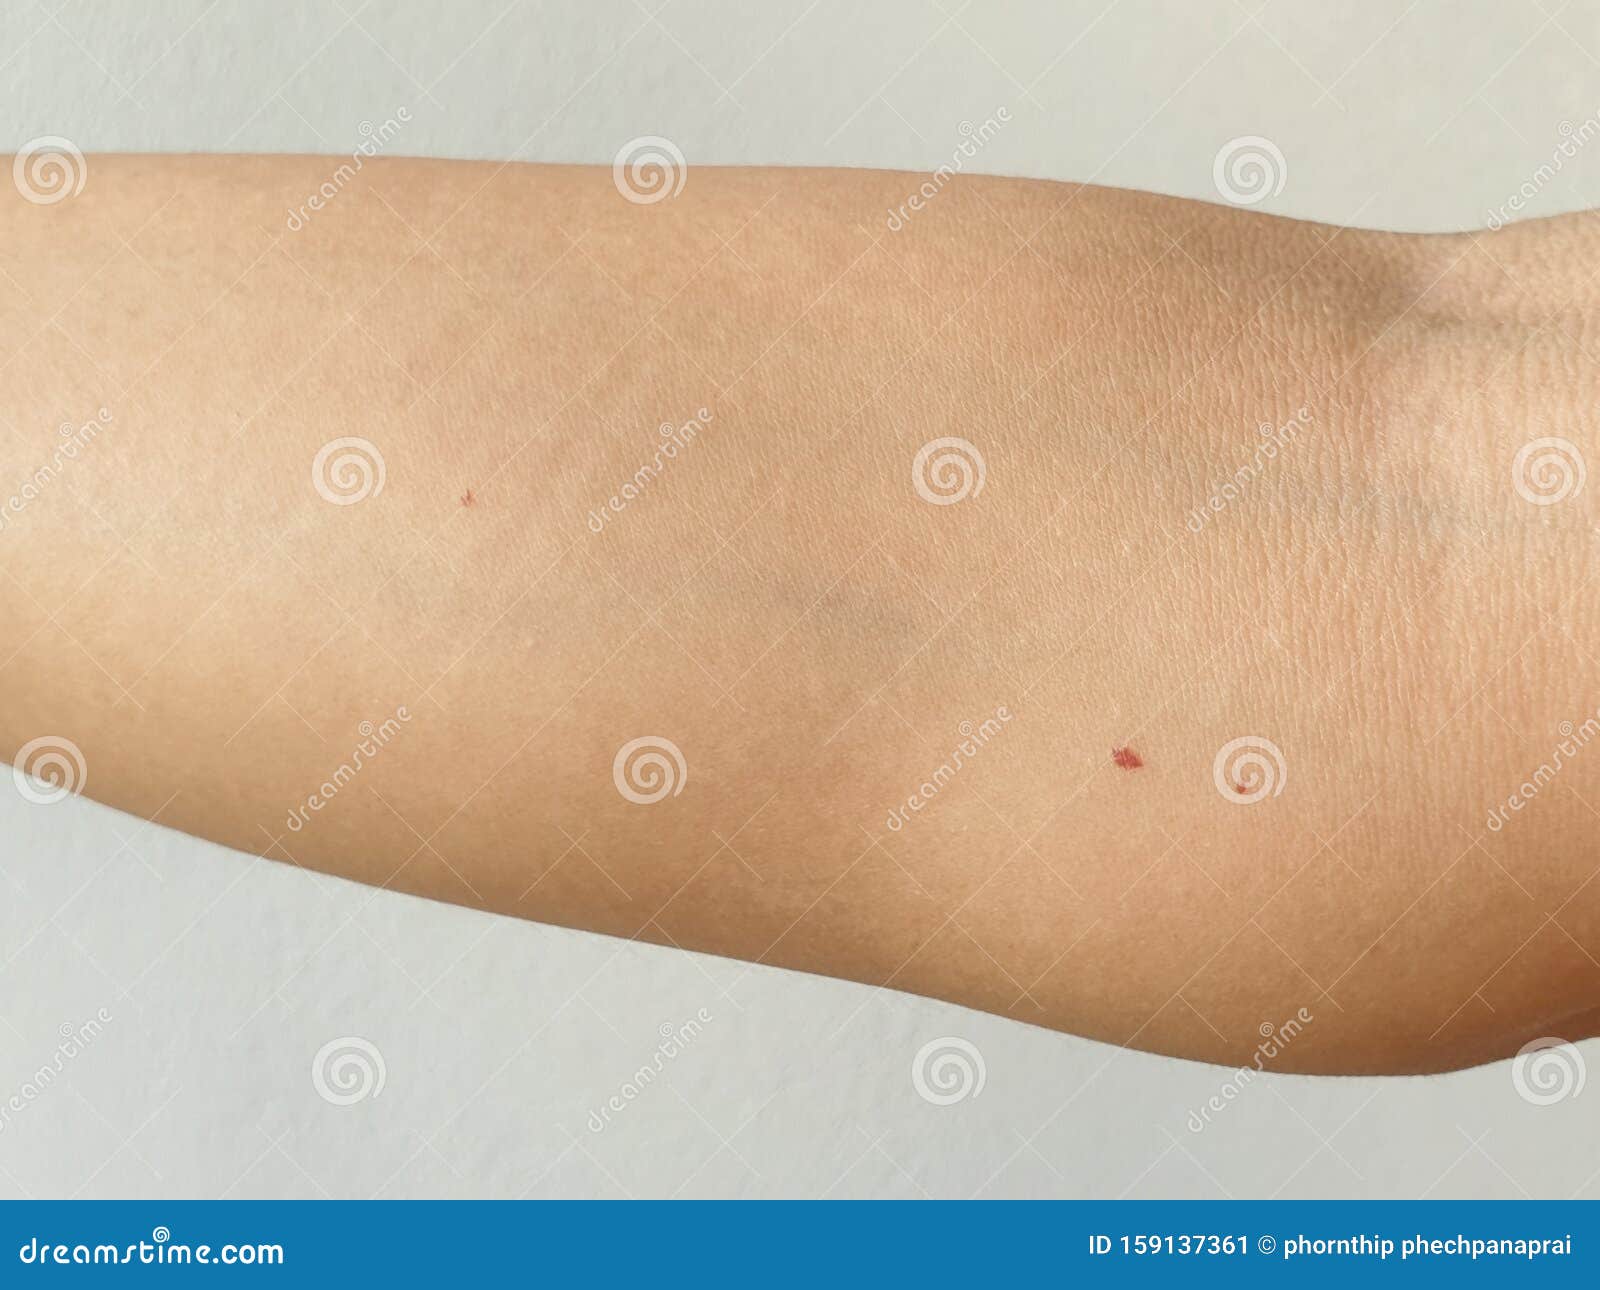 Himmel lukke godt Cherry Angiomas Red Mole, Red Mark on Arm Skin, Red Dot Suddenly Appeared.  Cherry Hemangioma on Arm Stock Image - Image of pigment, body: 159137361